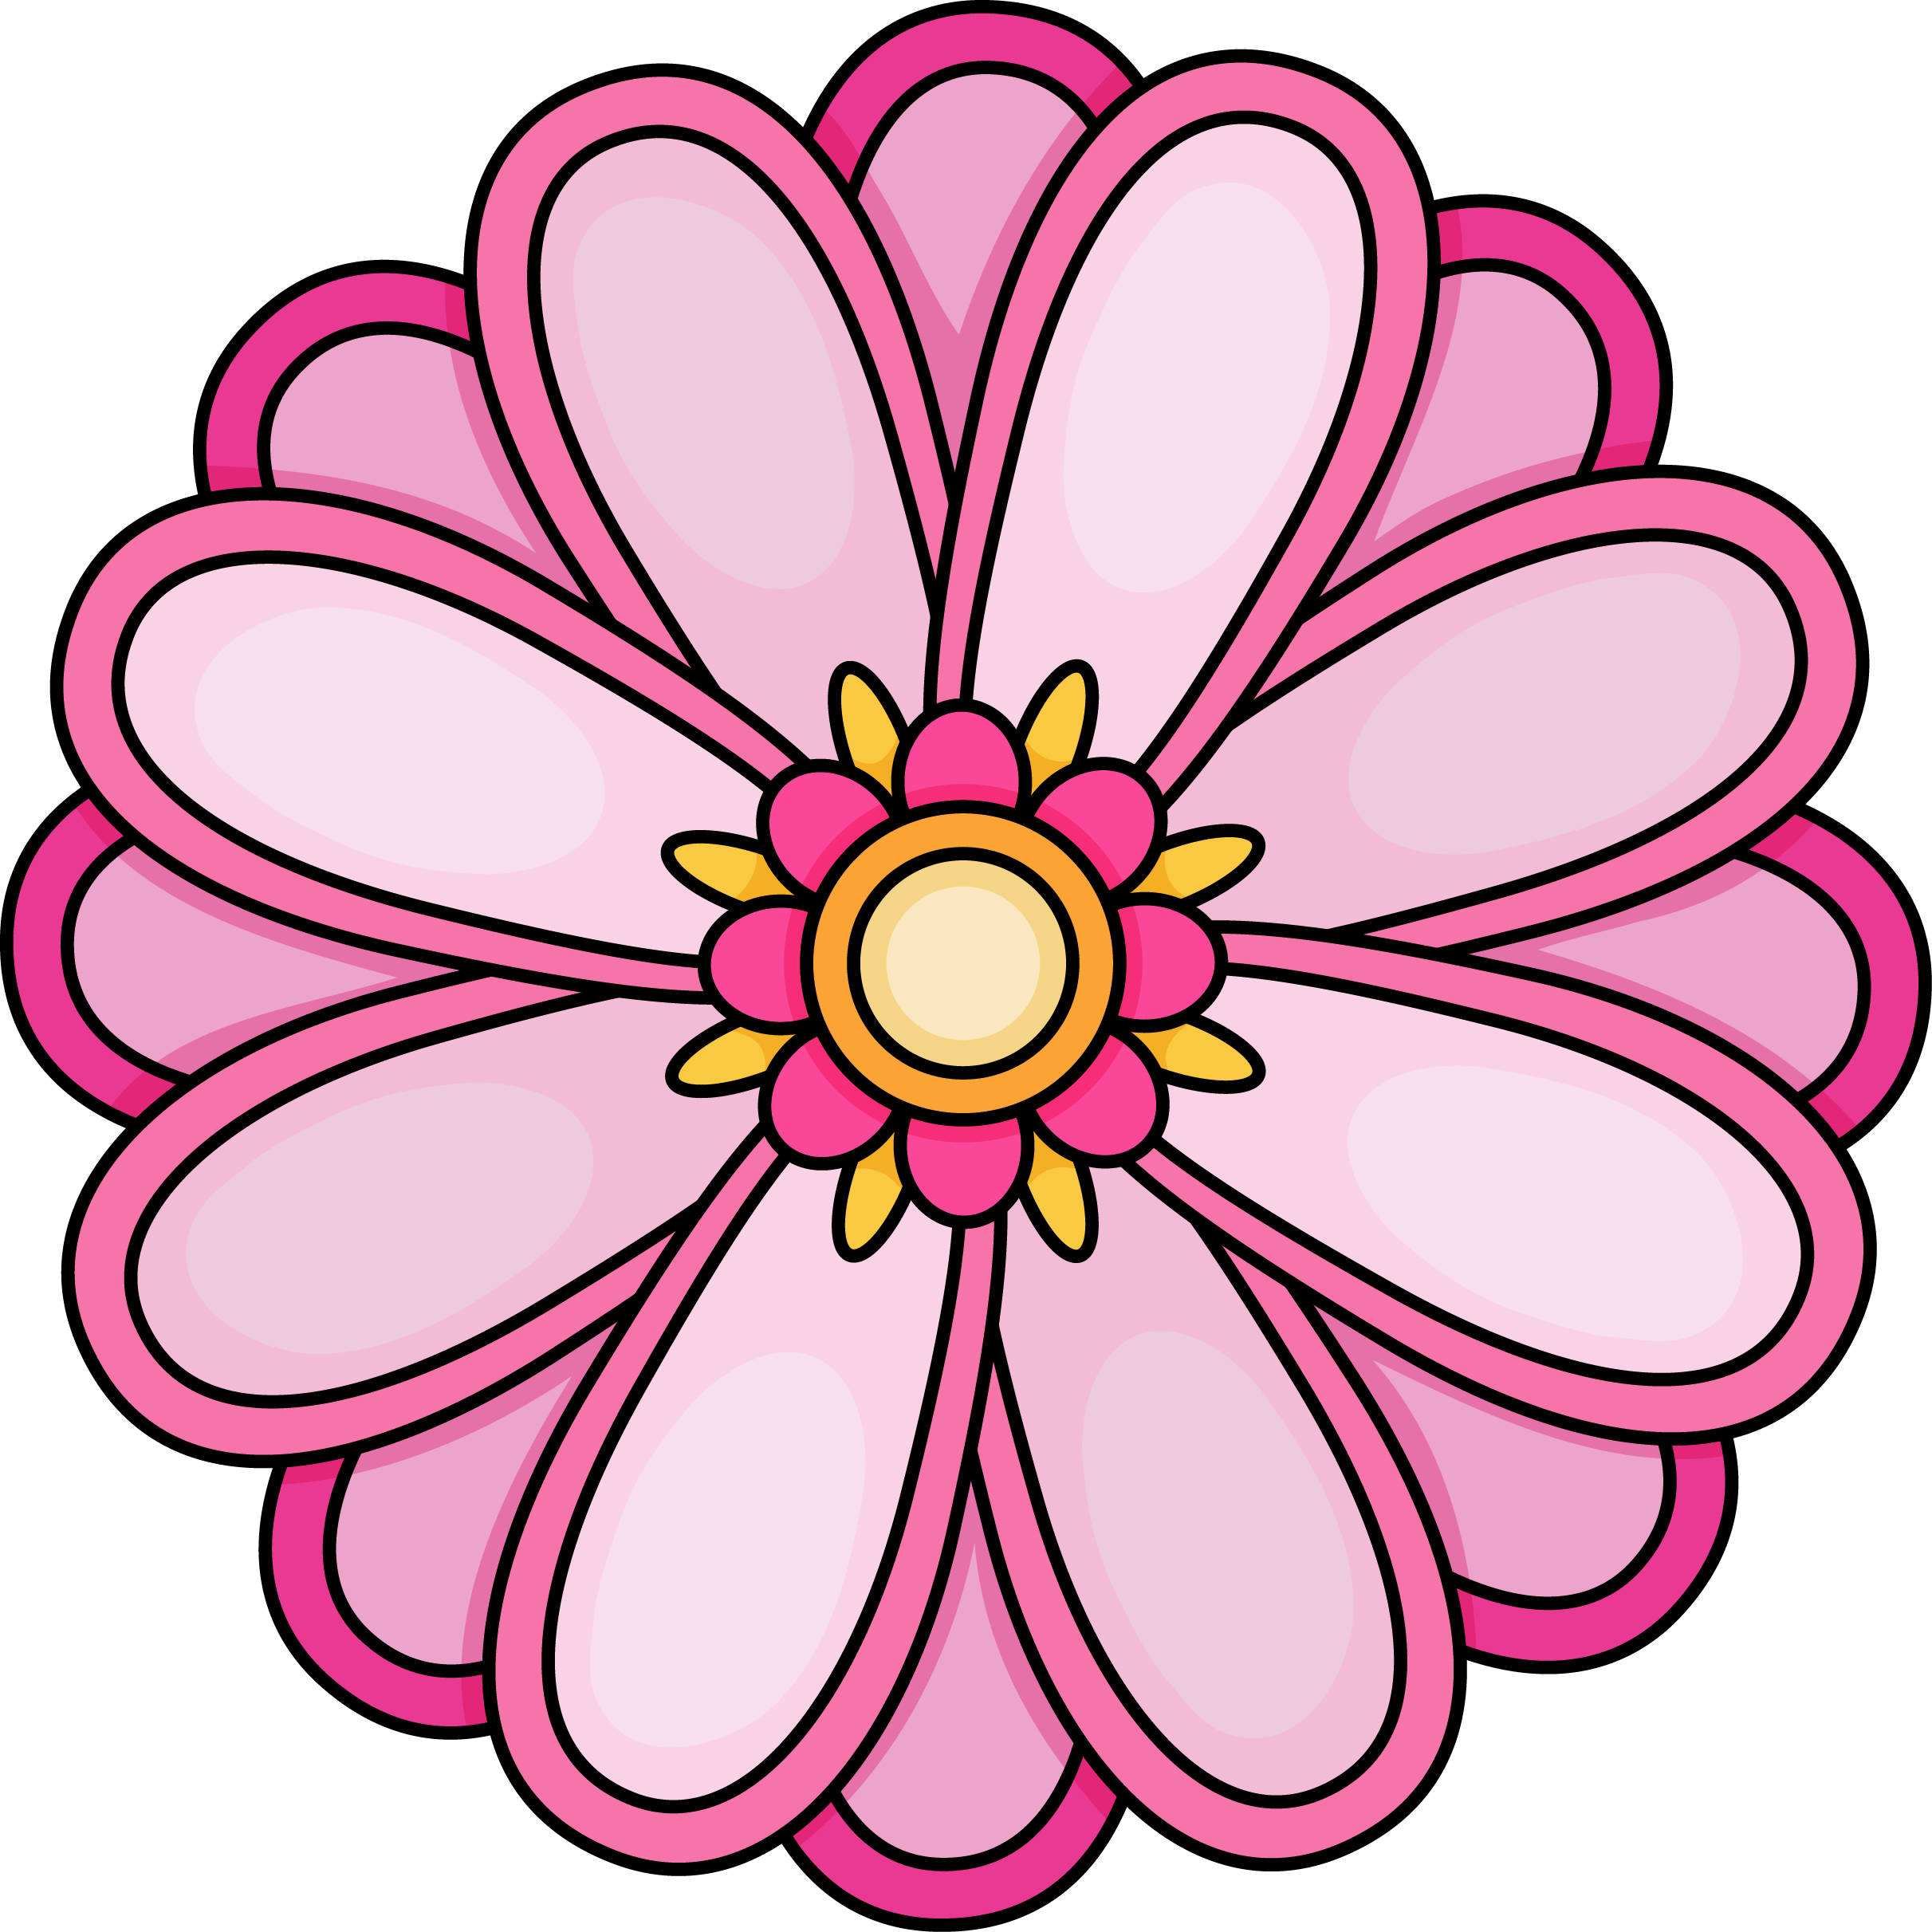 Opportunities Printable Pictures Of Flowers To Color - Flowers Printable With Color (2423x2423)